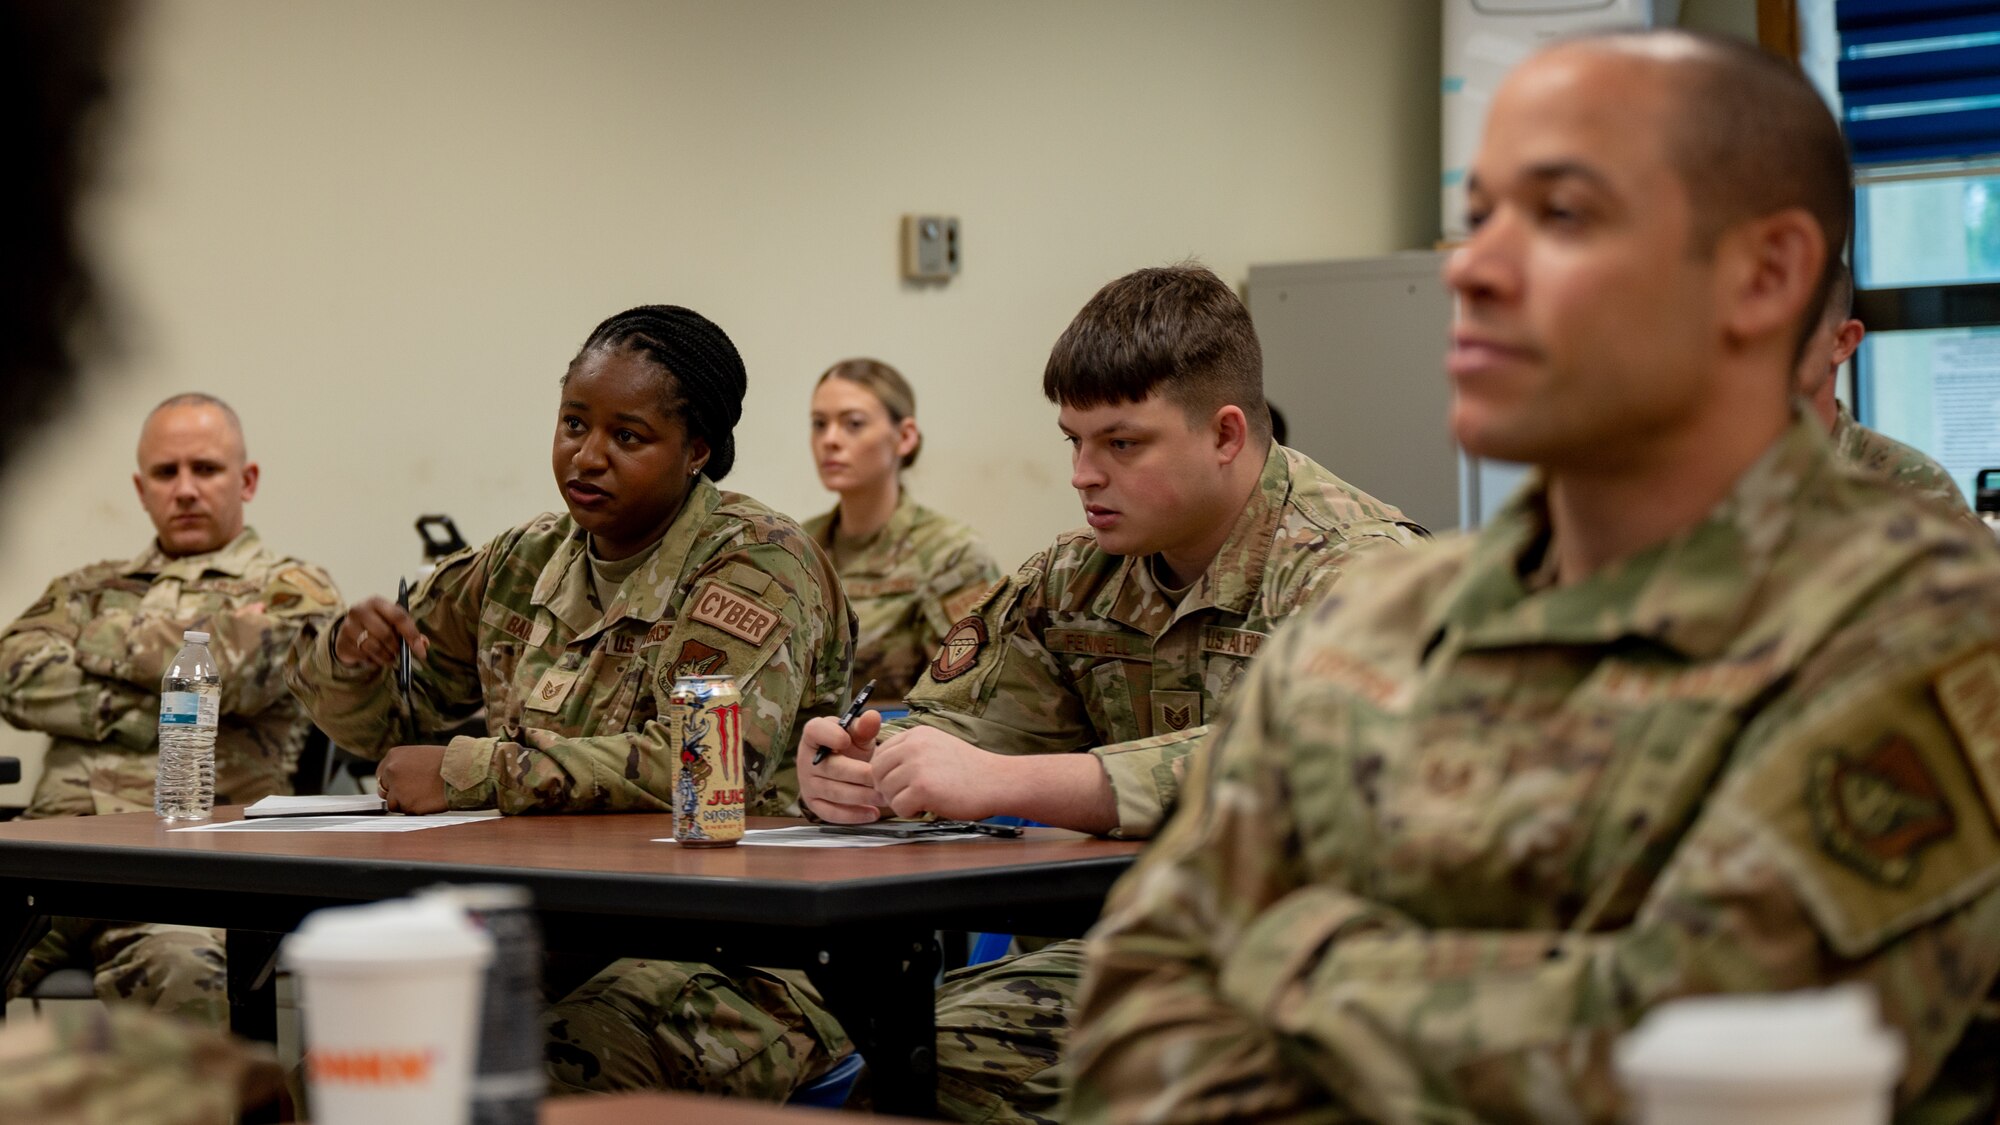 Tech Sgt. Agelyne Baliey explains why she strives to become a shirt during a First Sergeant Symposium.